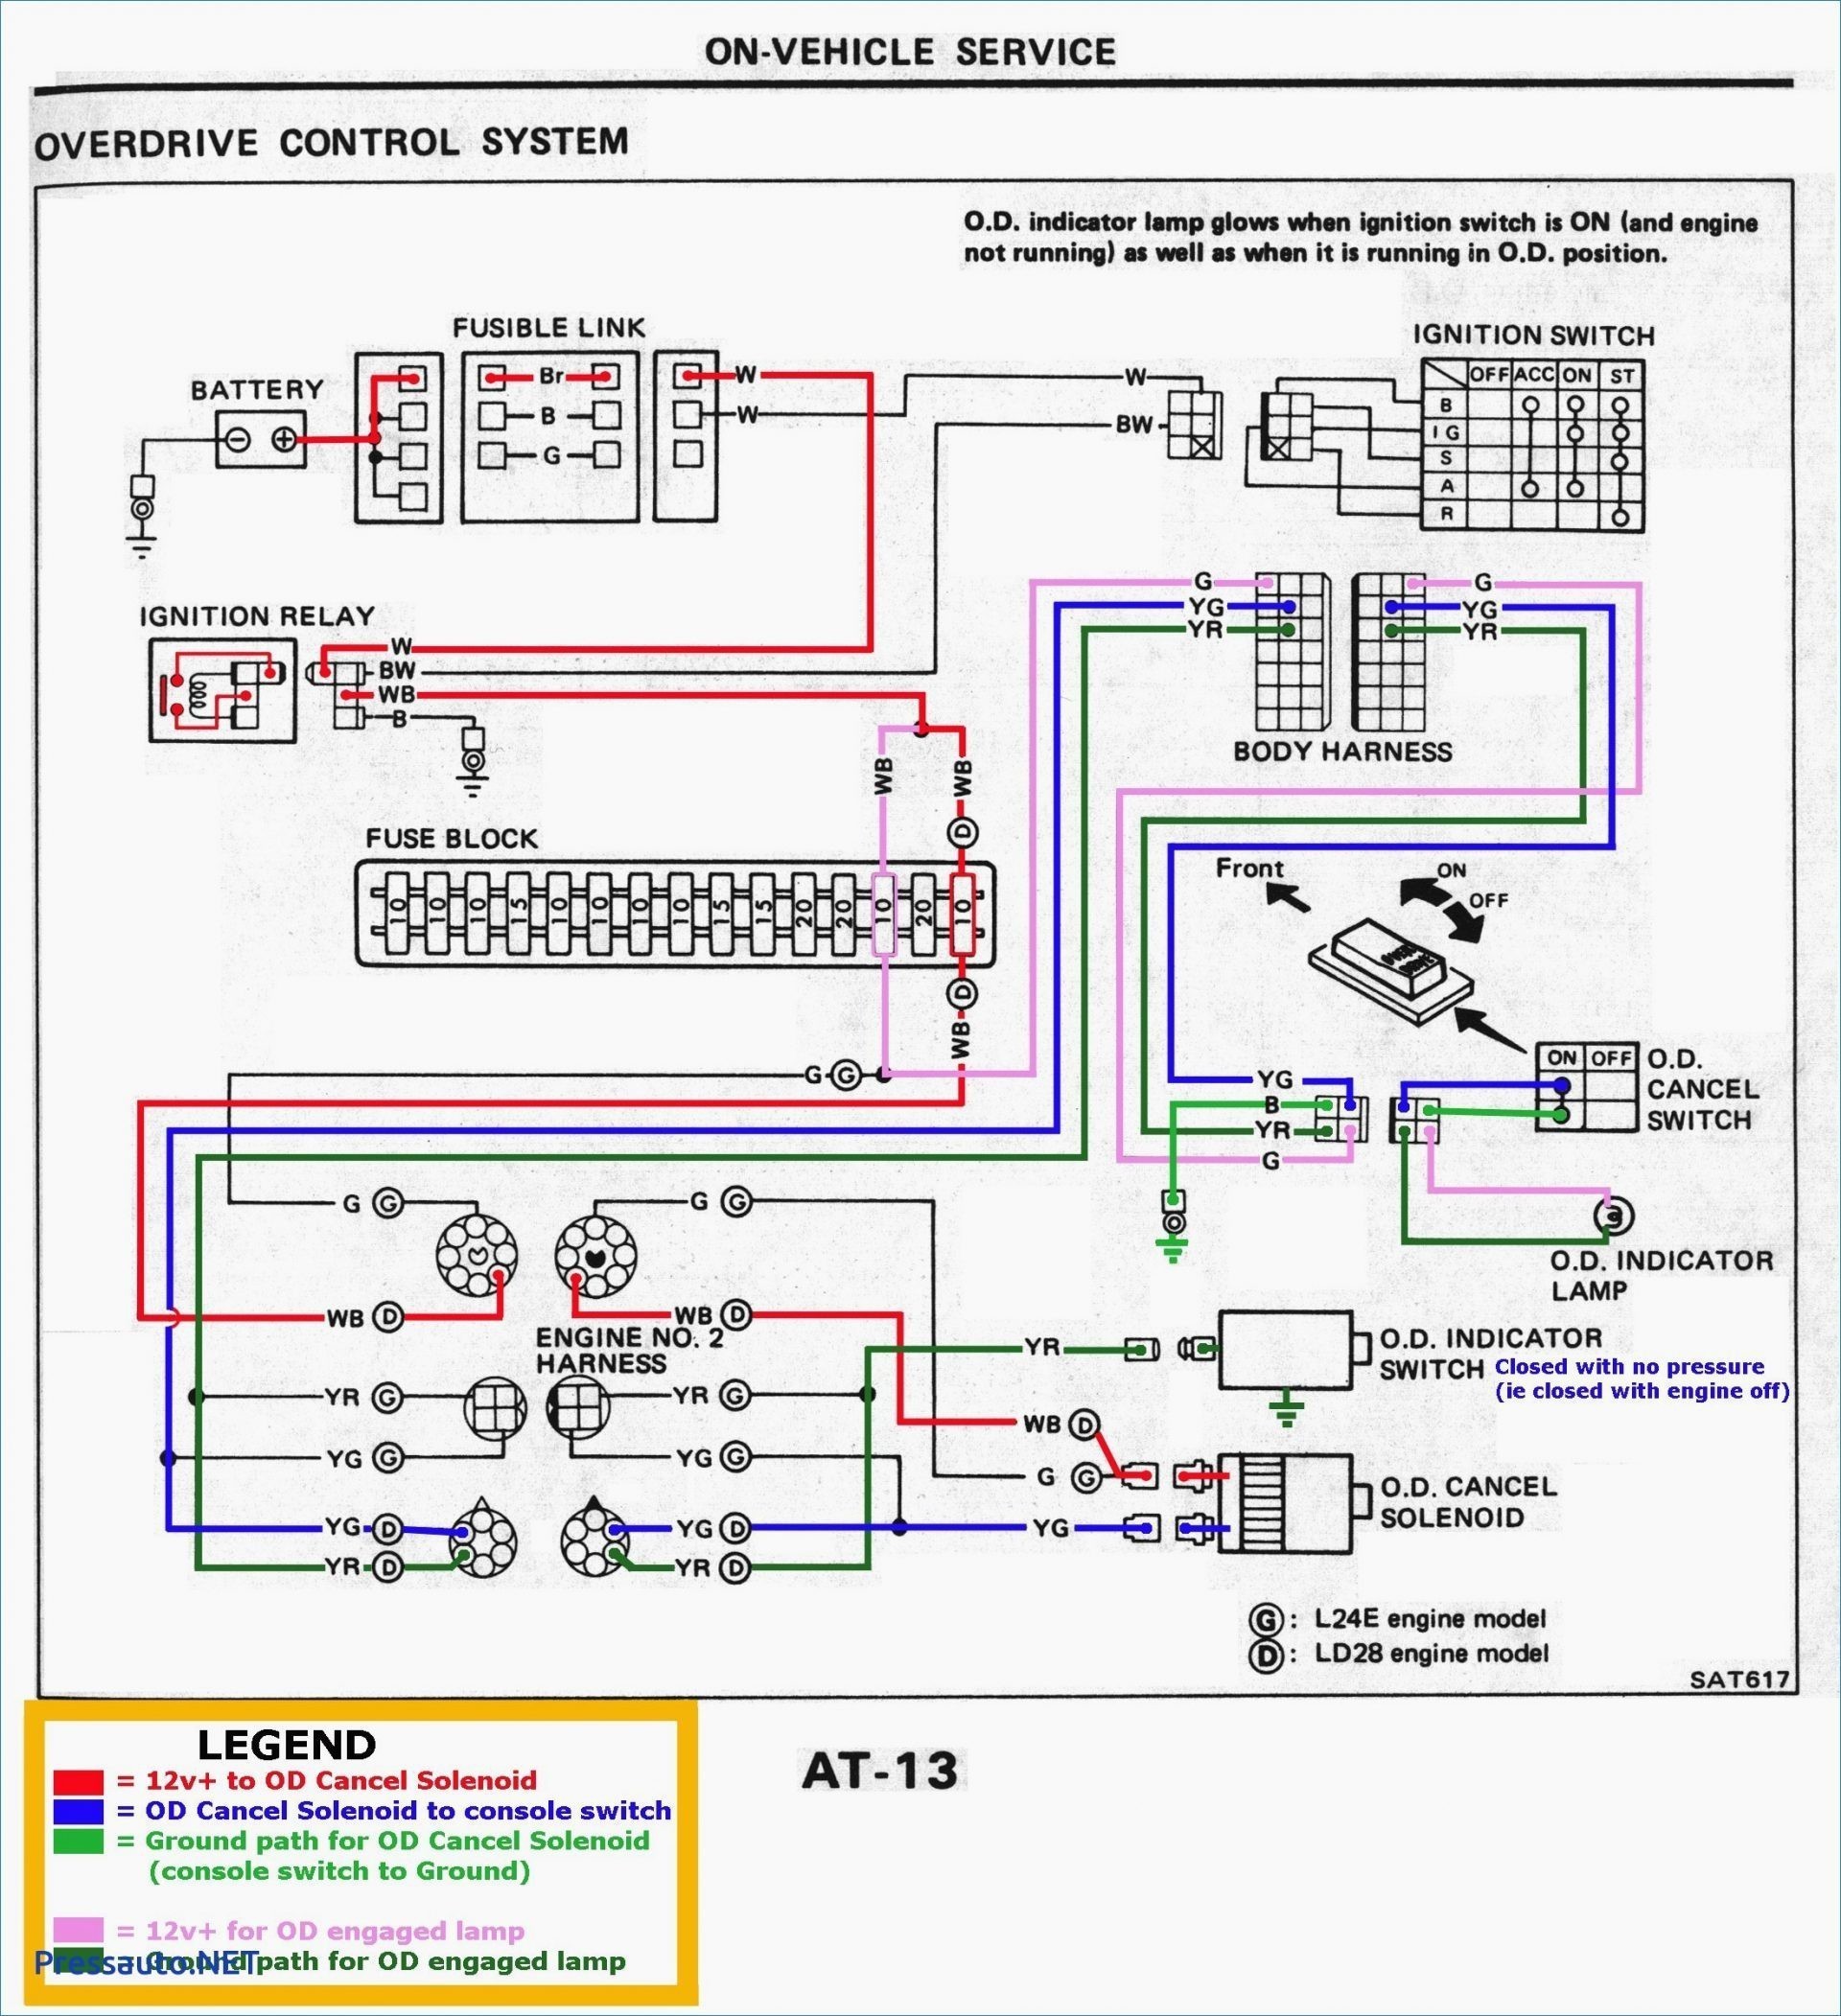 Car Trailer Wire Diagram Wiring Diagram towing socket Inspirationa 2017 Wiring Diagram for Rv Of Car Trailer Wire Diagram